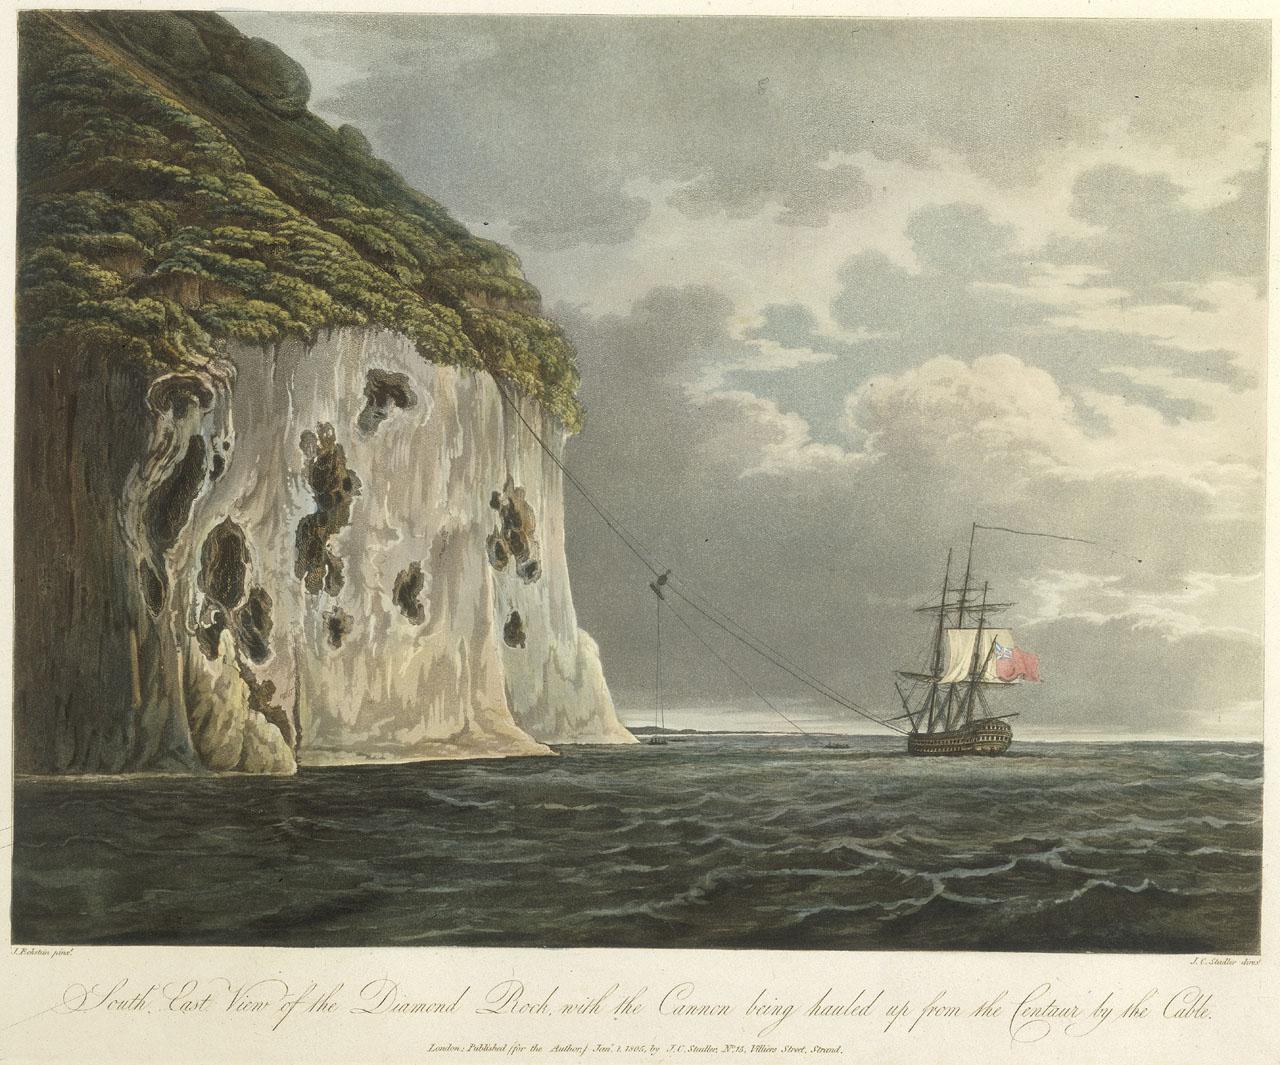 A print showing the southeast view of the Diamond Rock by John Eckstein